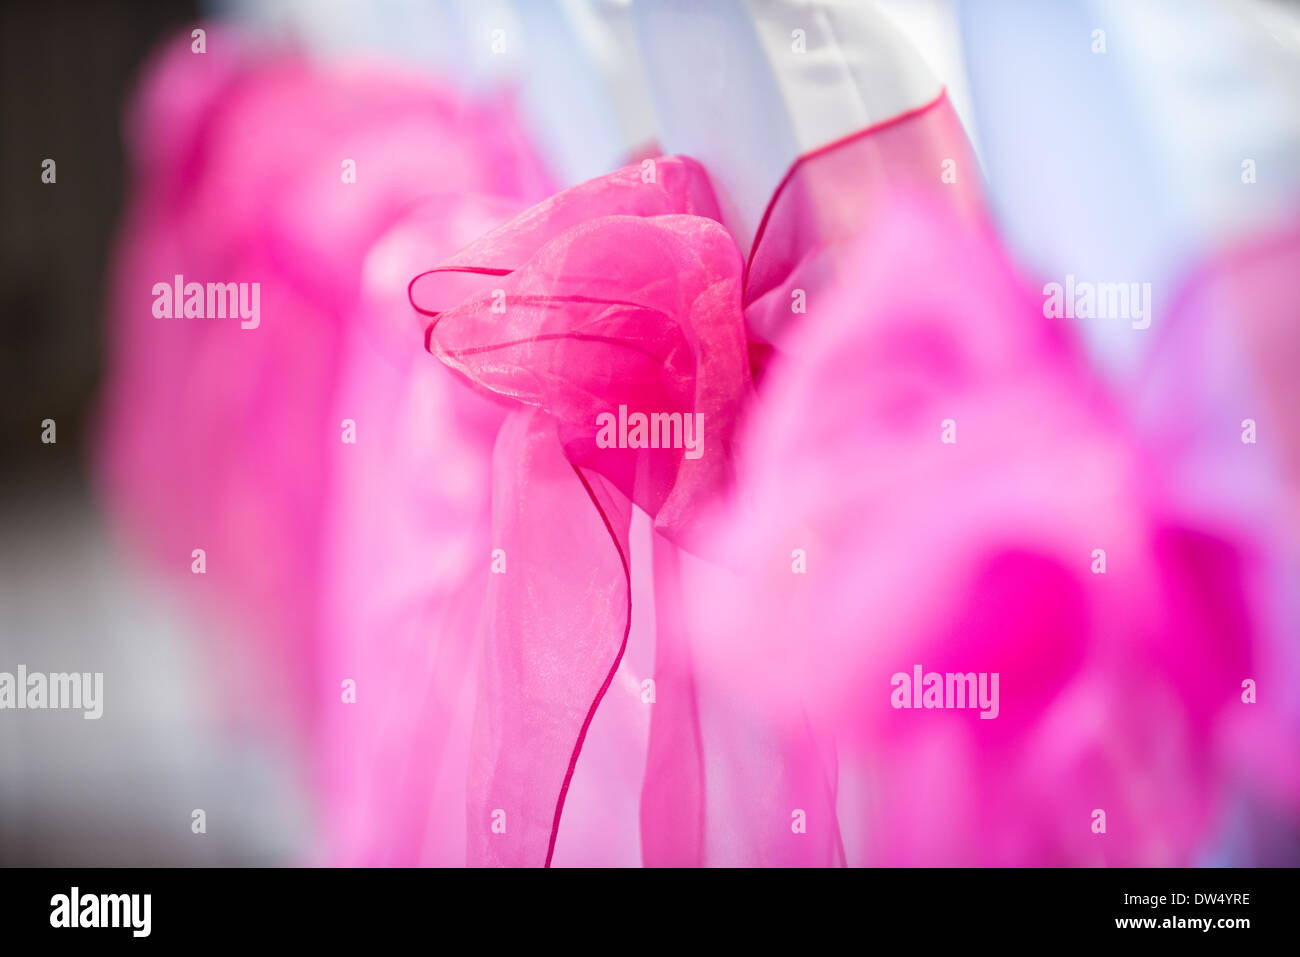 A shallow focus image of pink bows tied to white chair backs Stock Photo